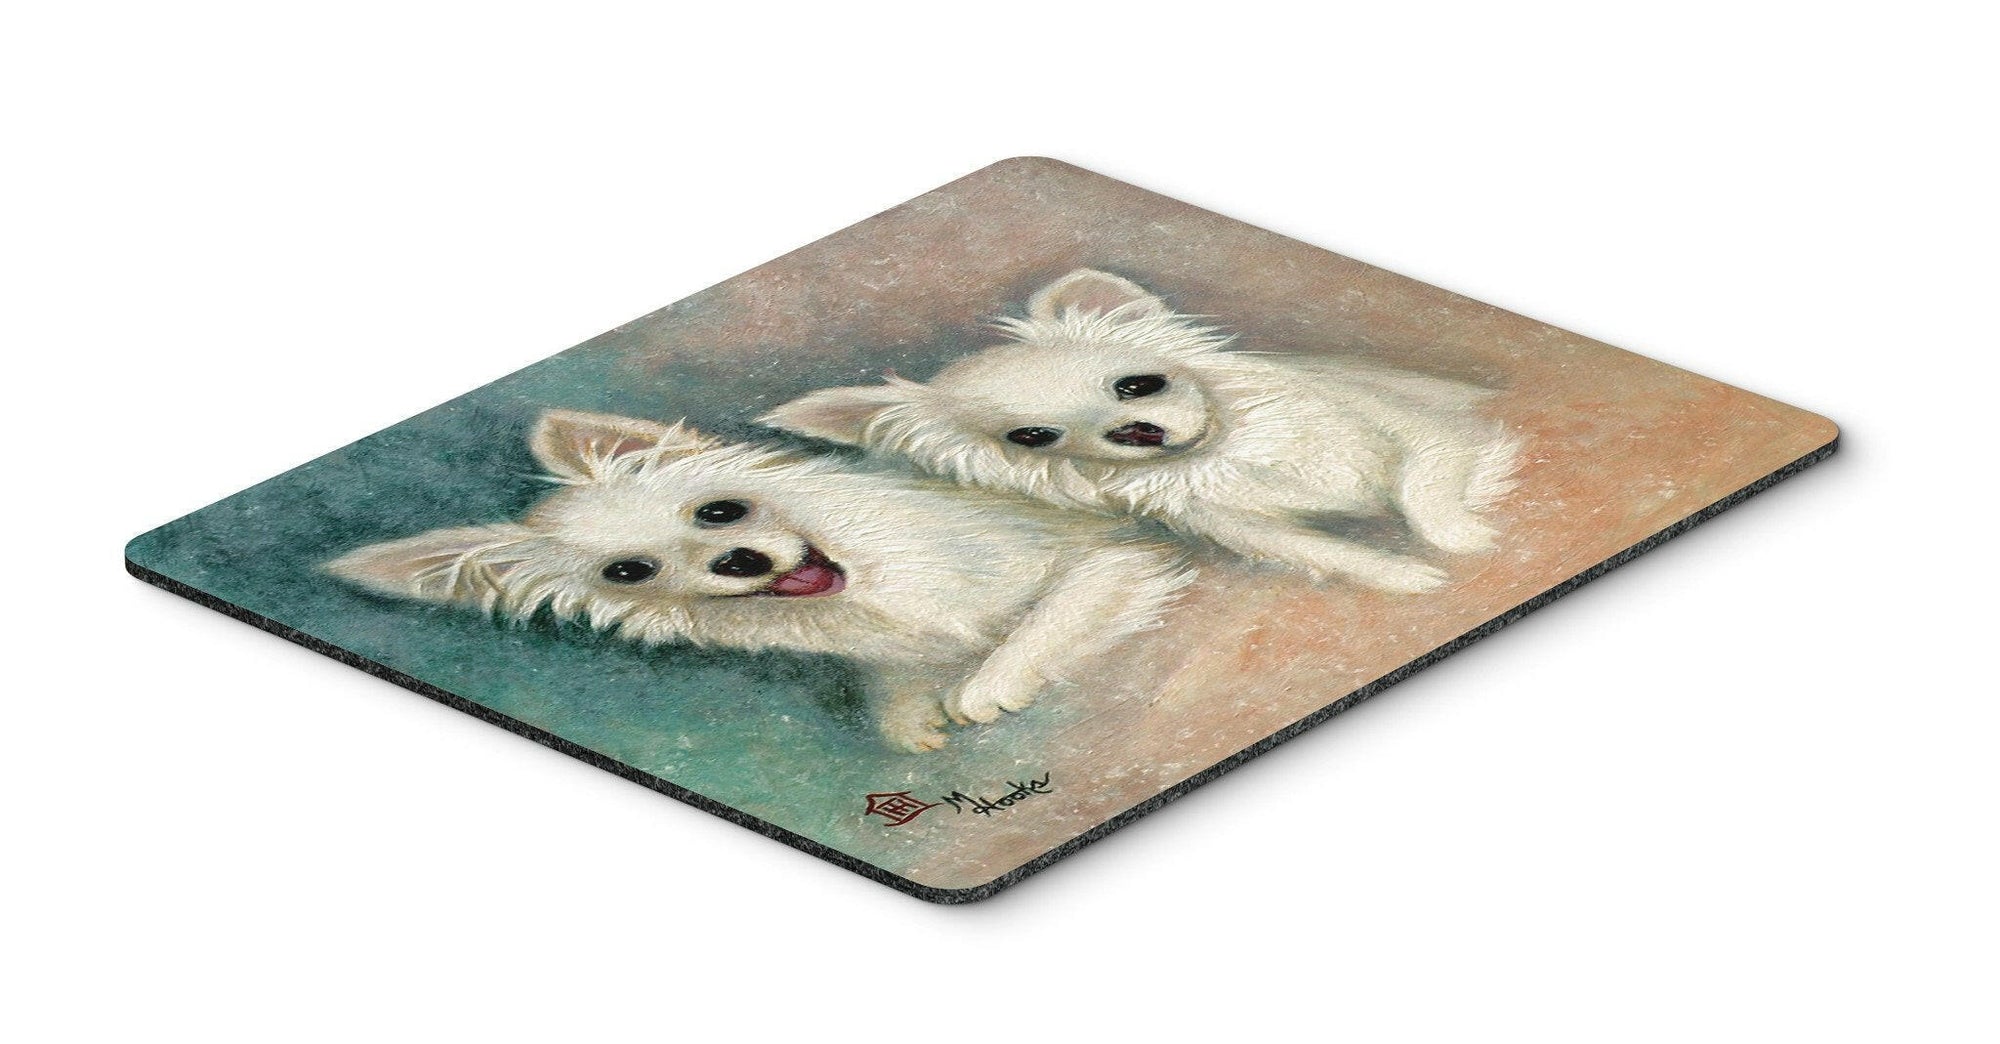 Chihuahua The Siblings Mouse Pad, Hot Pad or Trivet MH1064MP by Caroline's Treasures